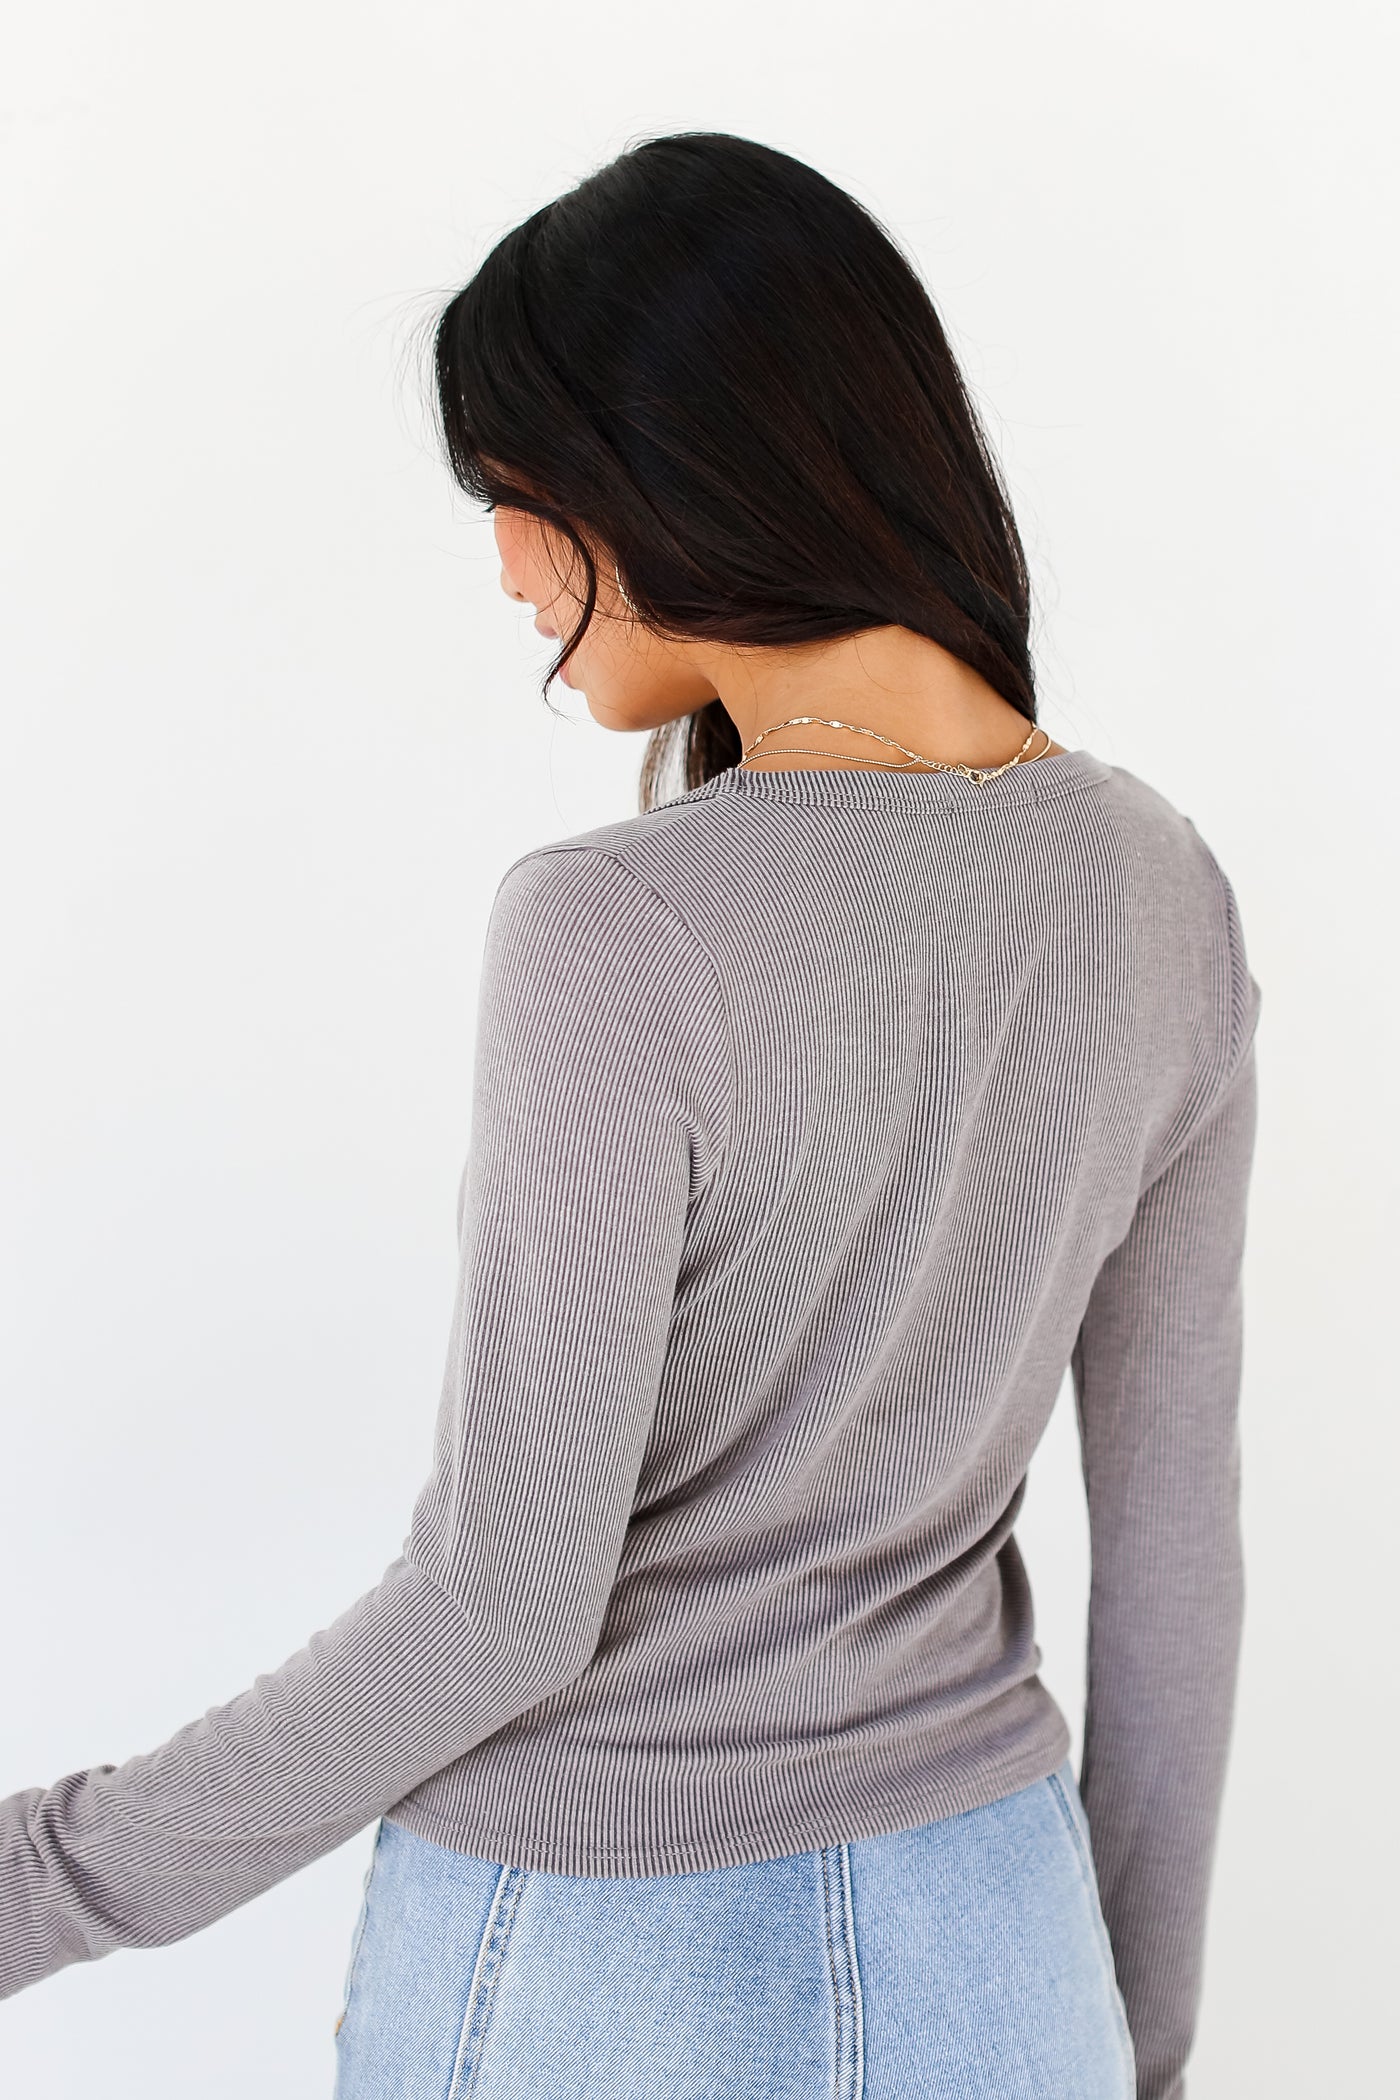 basic long sleeve Grey Corded Top back view